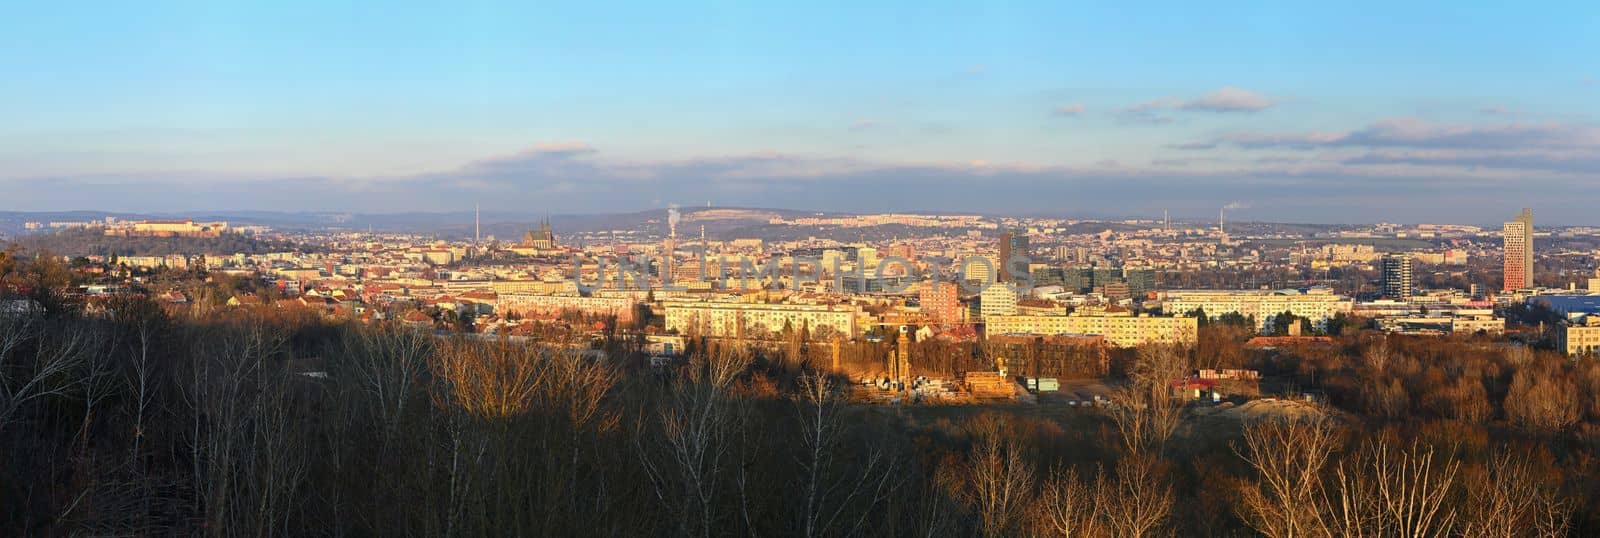 City of Brno - Czech Republic - Europe. City skyline at sunset. Panoramic photography. by Montypeter